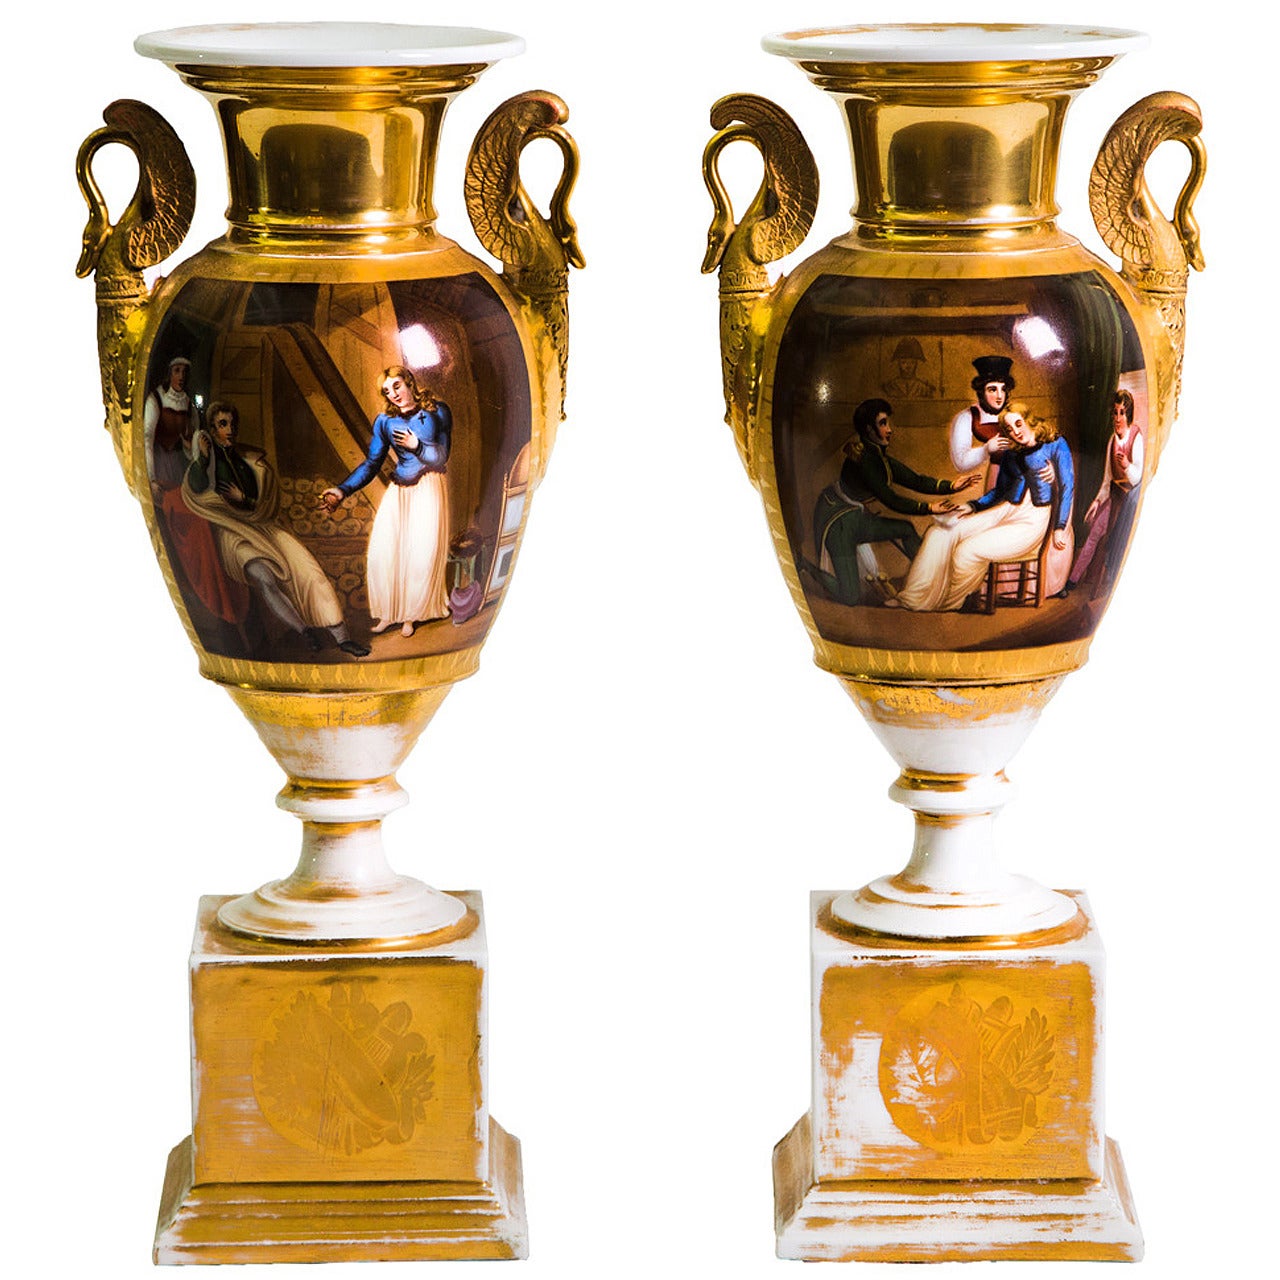 Pair of French Empire Porcelain Vases